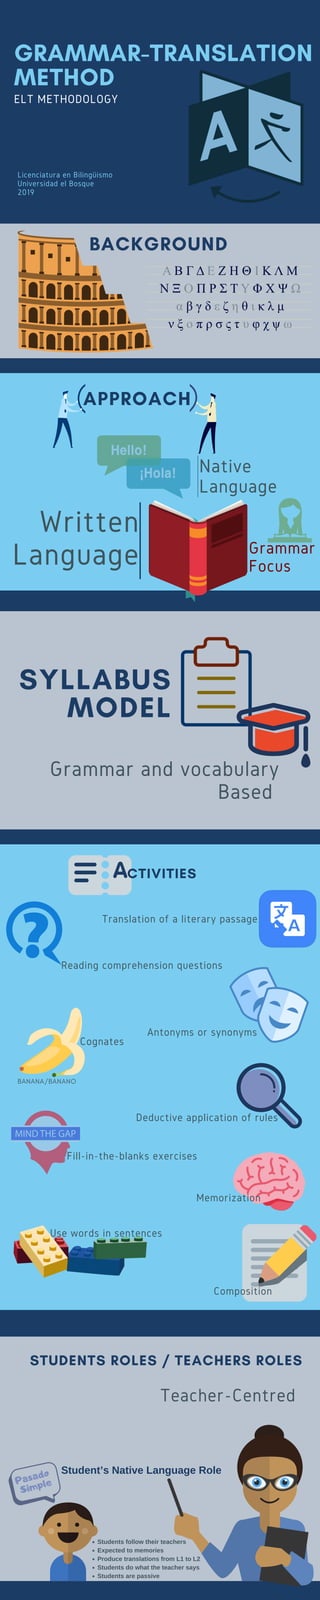 GRAMMAR-TRANSLATION
METHOD
ELT METHODOLOGY
APPROACH
Grammar and vocabulary
Based
SYLLABUS
MODEL
Teacher-Centred
STUDENTS ROLES / TEACHERS ROLES
Pasado
Simple
Translation of a literary passage
CTIVITIES
Native
Language
Written
Language Grammar
Focus
Reading comprehension questions
Antonyms or synonyms
Cognates
Deductive application of rules
Fill-in-the-blanks exercises
BANANA/BANANO
Memorization
Use words in sentences
Composition
Students follow their teachers
Expected to memories
Produce translations from L1 to L2
Students do what the teacher says
Students are passive
Student’s Native Language Role
BACKGROUND
Licenciatura en Bilingüismo
Universidad el Bosque
2019
 